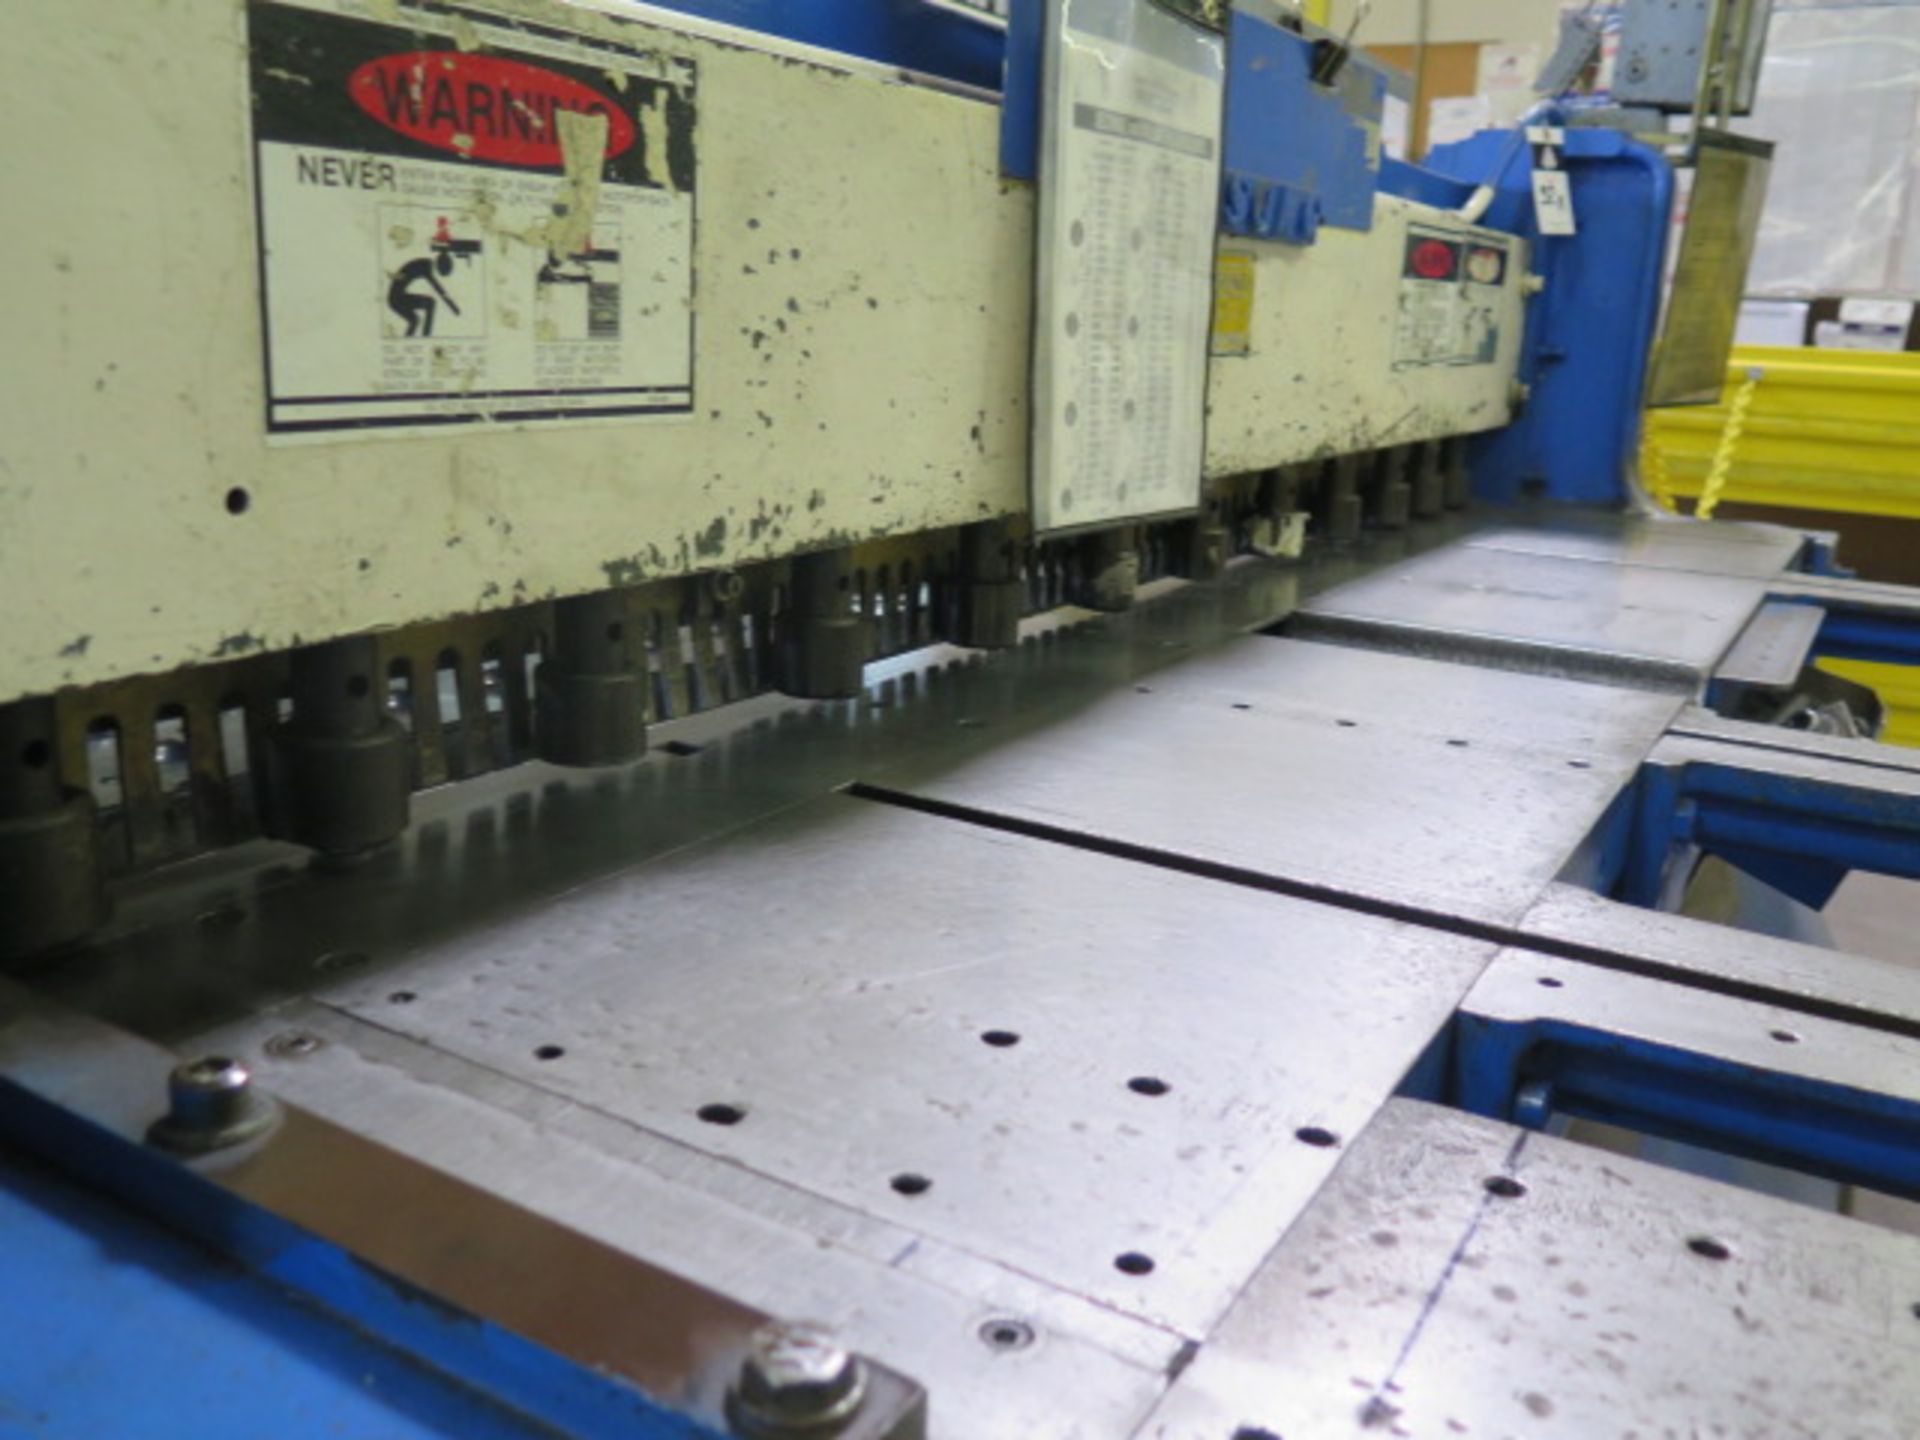 Wysong mdl. 1472 14GA x 72" Power Shear s/nP15-4521 w/80" Sq, Front Supports, NO BACK GA, SOLD AS IS - Image 5 of 11